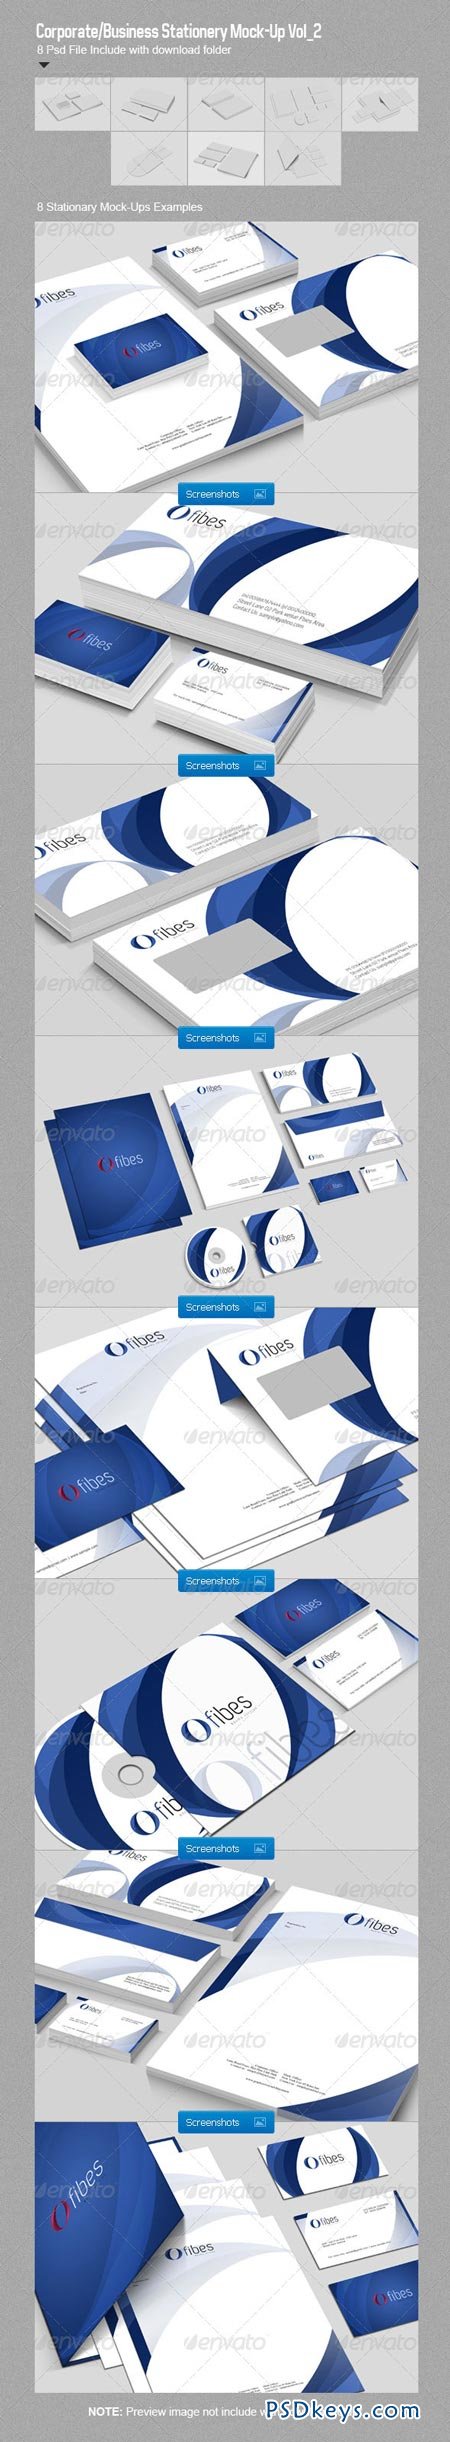 Corporate Business Stationery Mock-Up Vol_2 GraphicRiver